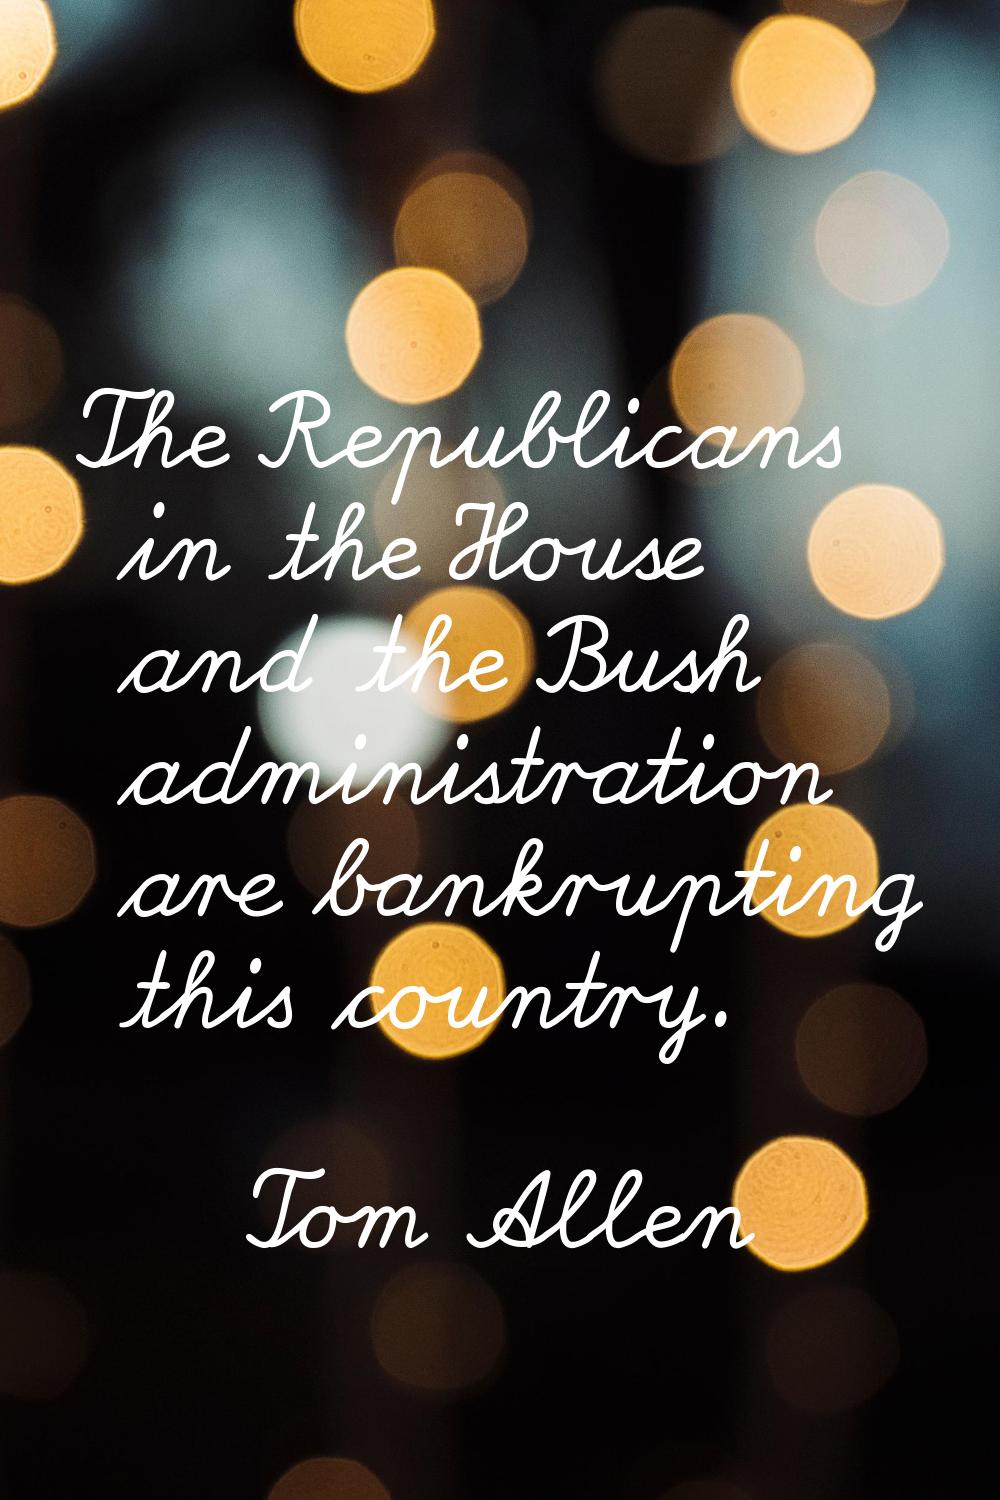 The Republicans in the House and the Bush administration are bankrupting this country.